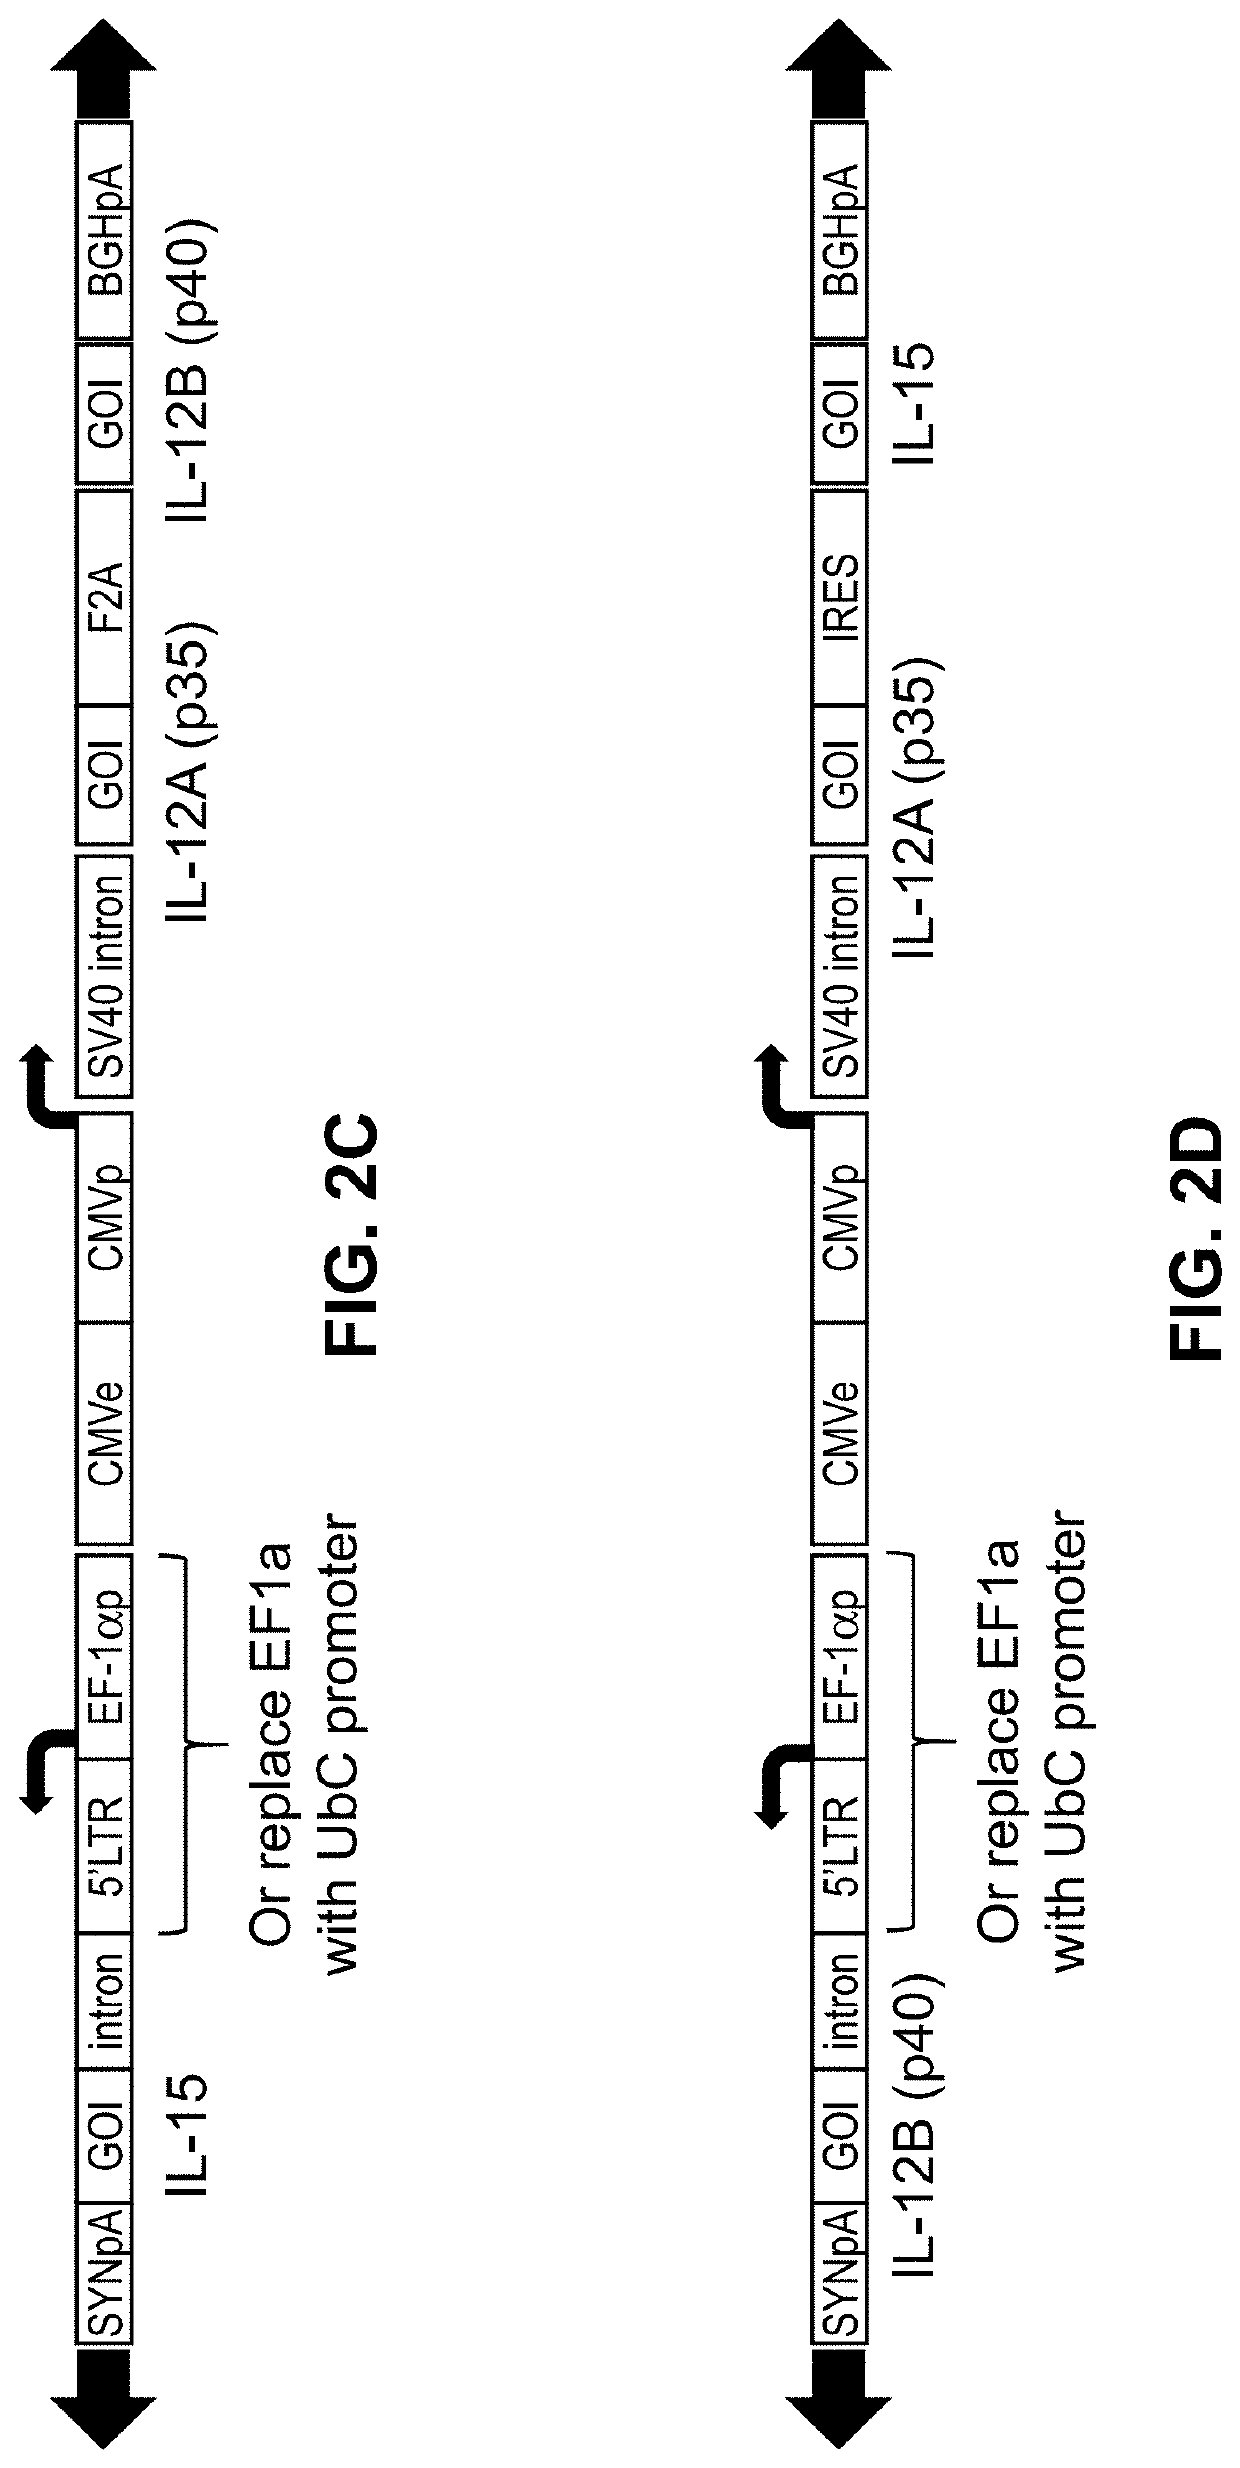 Viral vector constructs for delivery of nucleic acids encoding cytokines and uses thereof for treating cancer